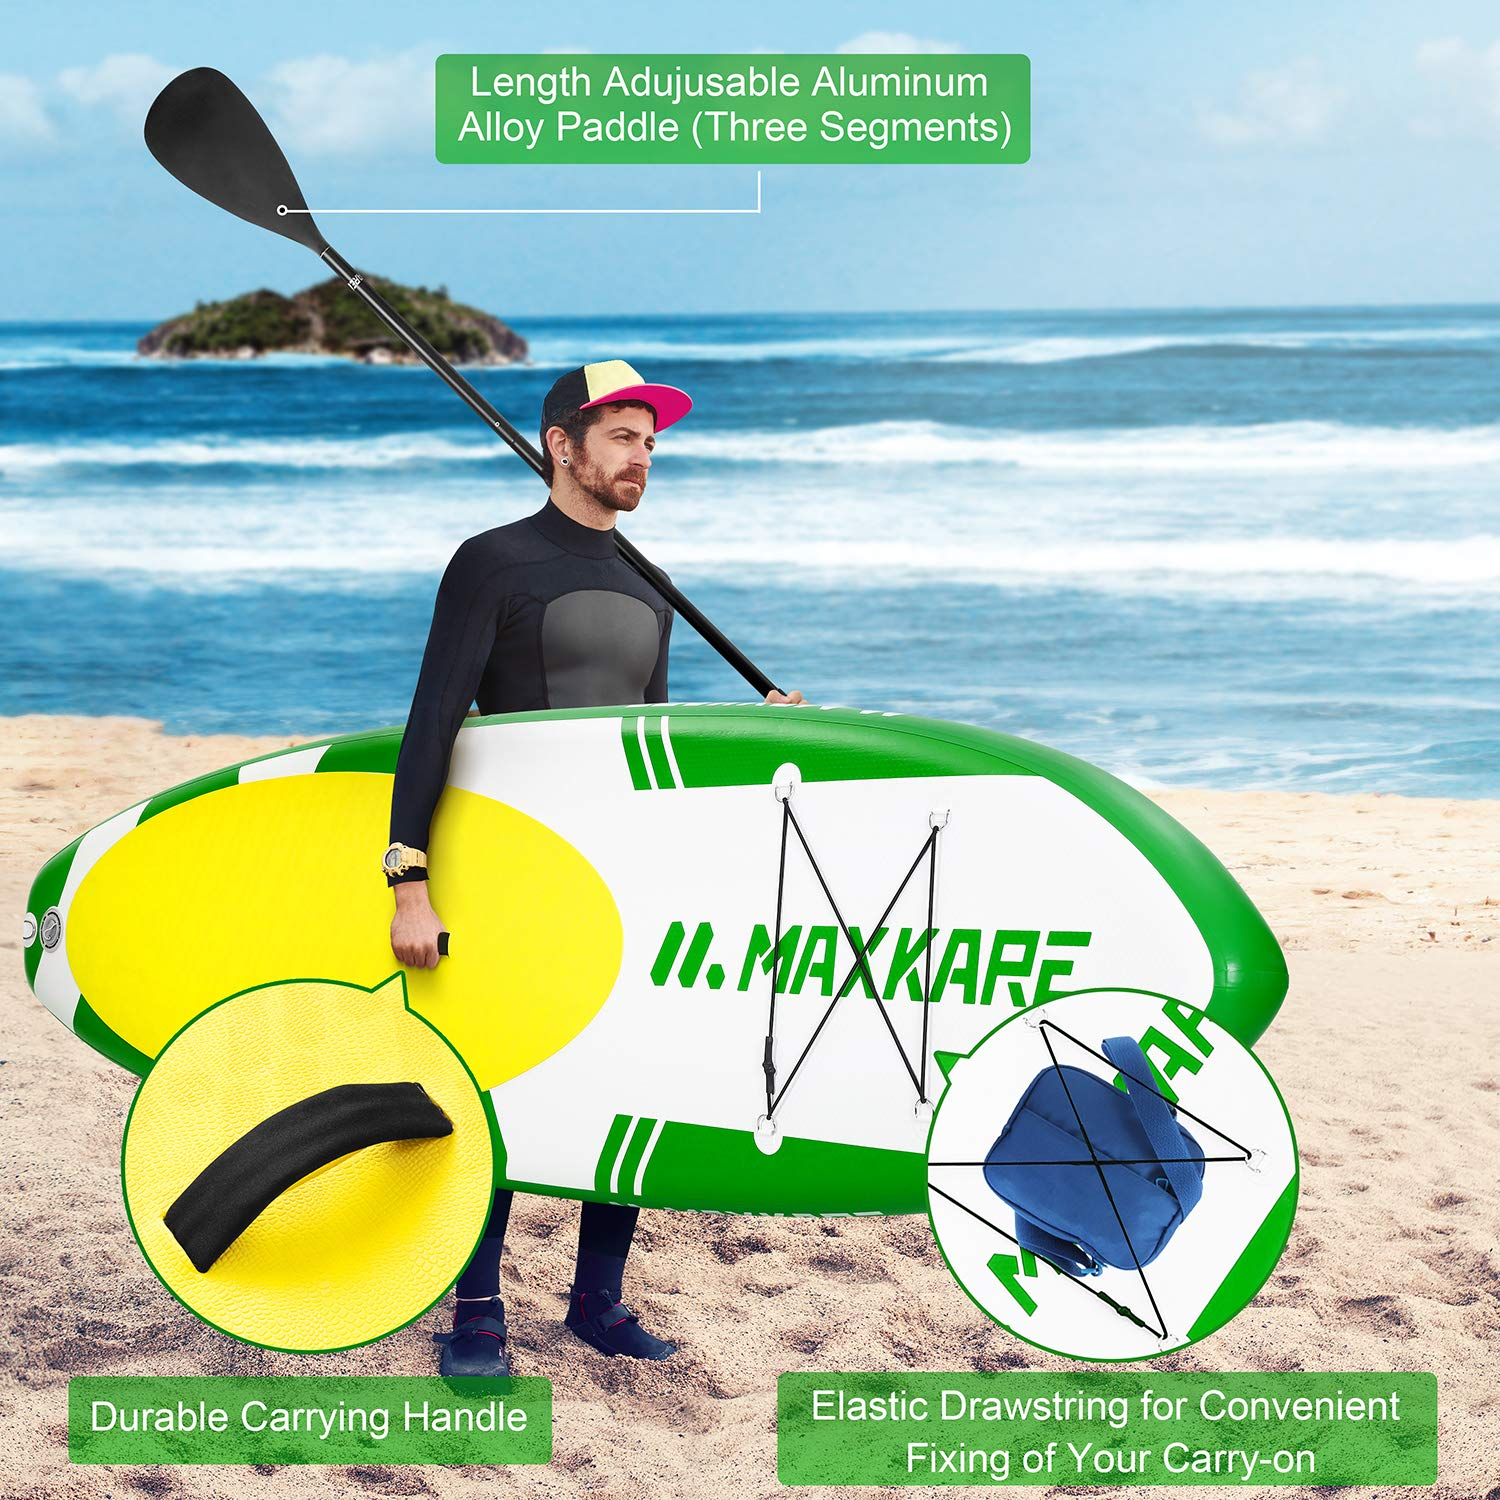 – MAXKARE Inflatable Paddle Board MaxKare Board Up Stand Paddle SUP